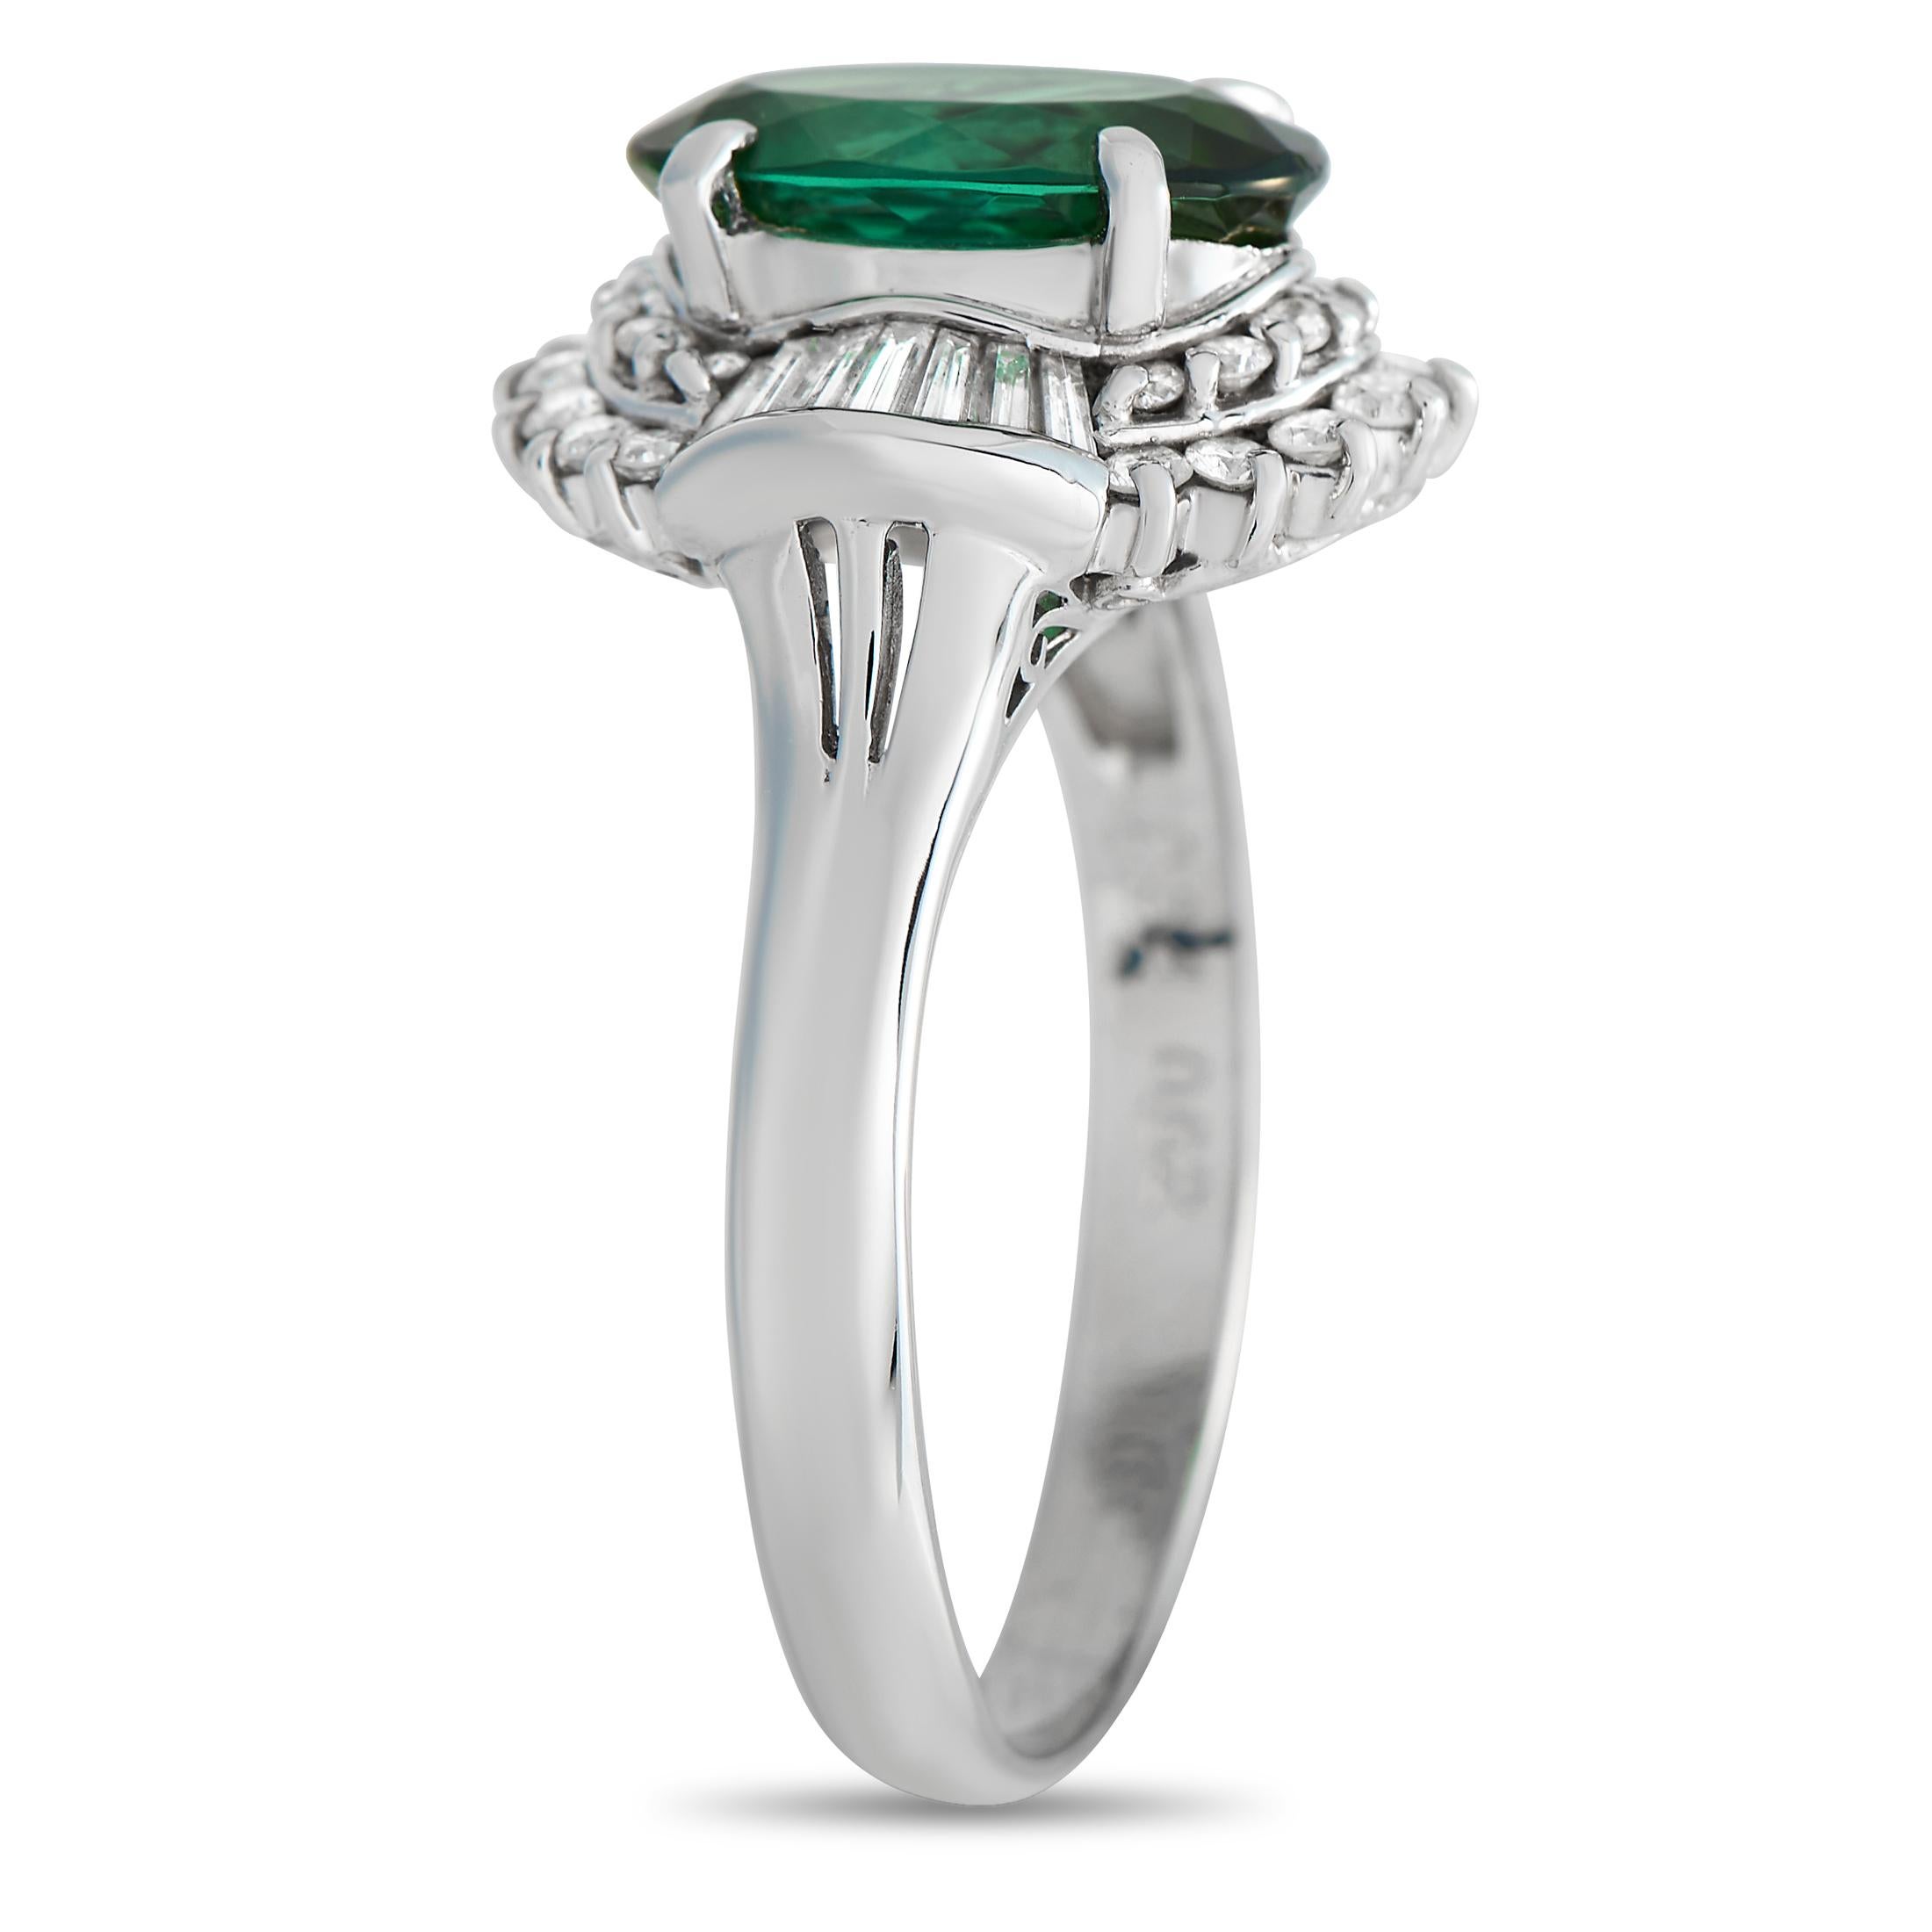 A radiant green 2.34 carat Tourmaline gemstone makes a statement at the center of this ring’s breathtaking Platinum setting, which features a 2mm wide band and an 8mm top height. It’s also surrounded by a dynamic halo of diamonds, which together